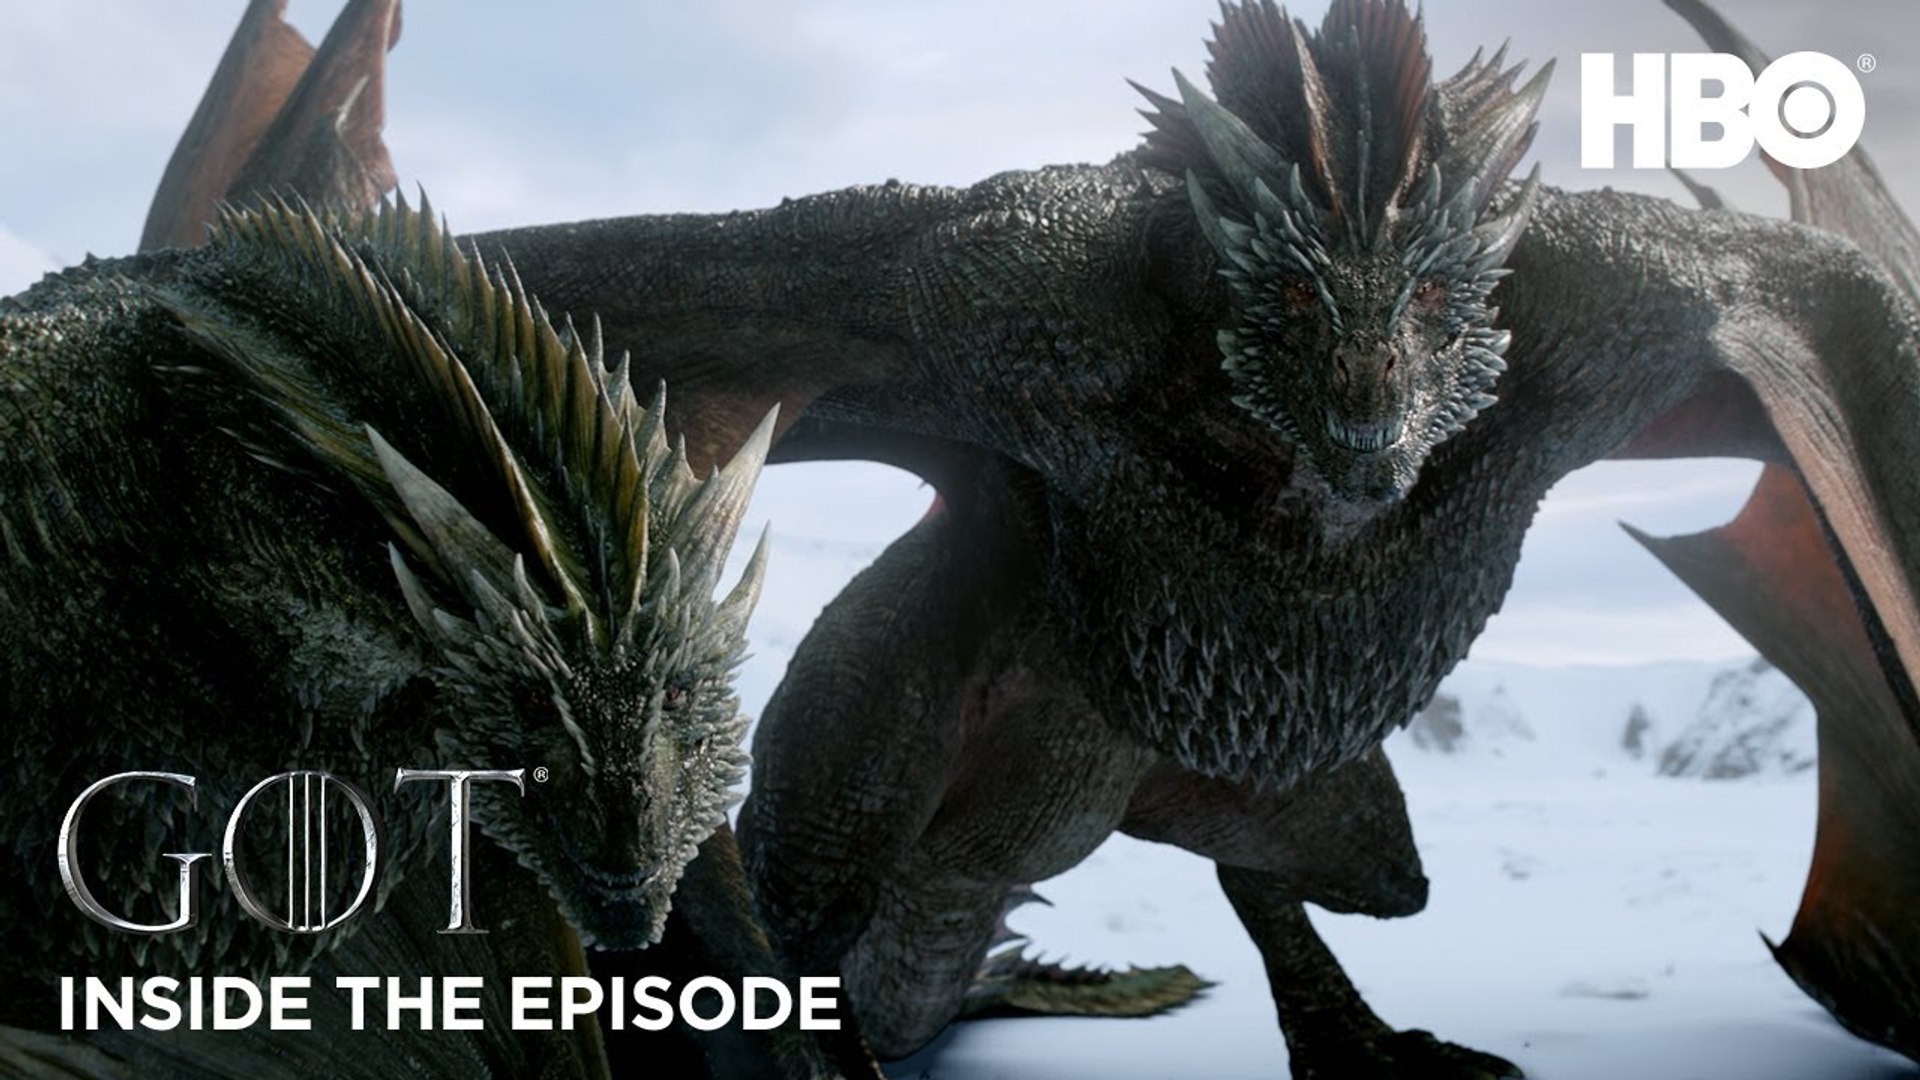 Game Of Thrones Season 8 Episode 1 Inside The Episode 2019 Hbo Images, Photos, Reviews